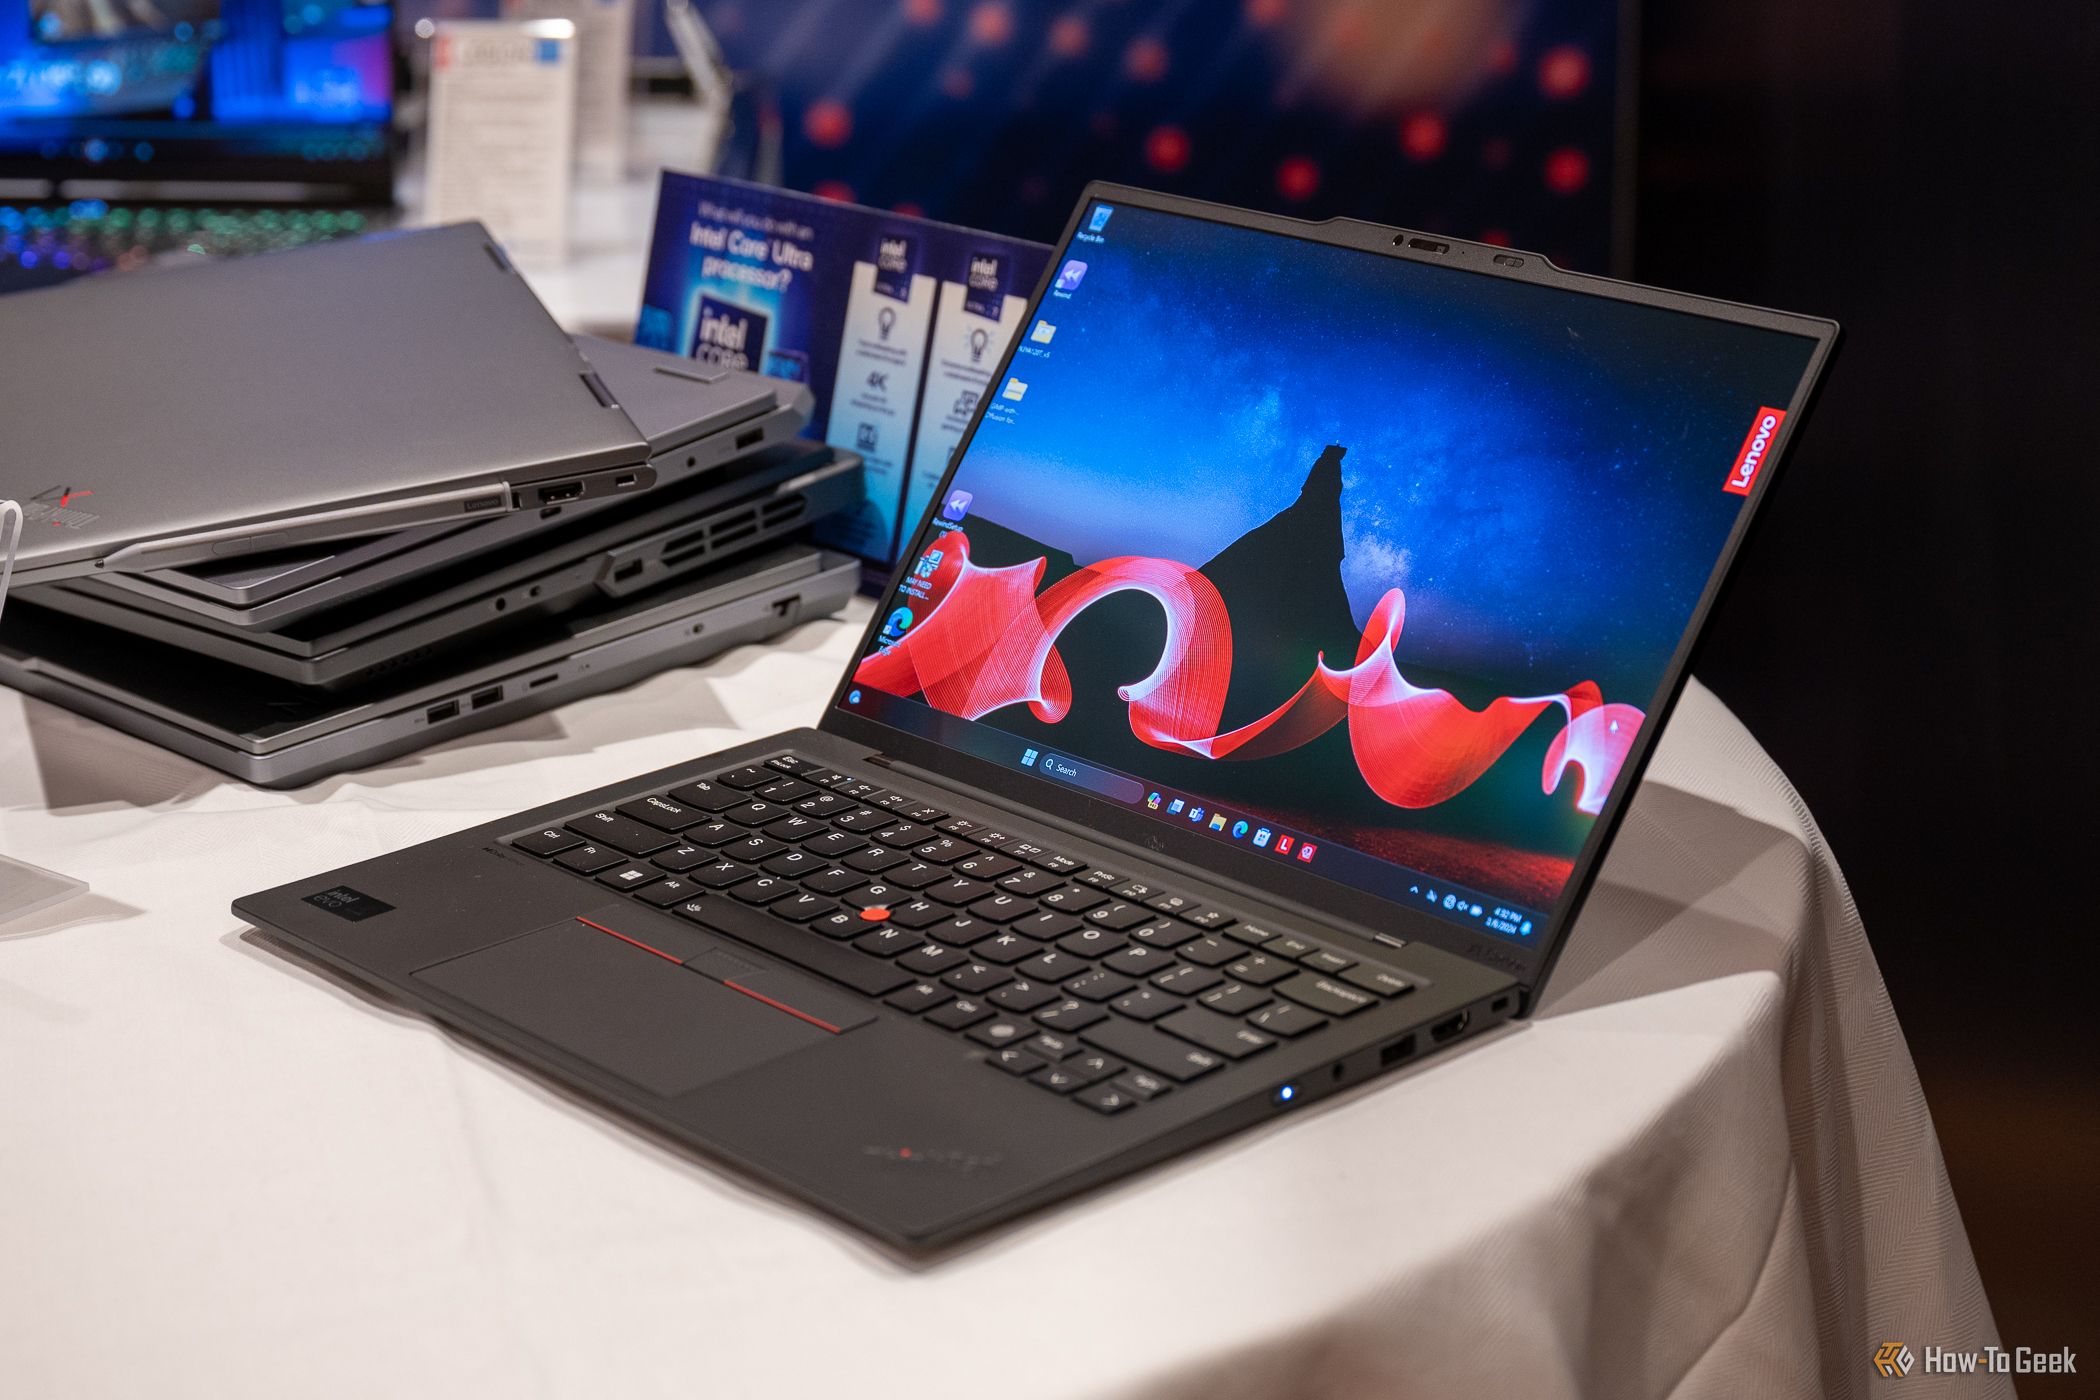 Lenovo ThinkPad X1 Carbon Gen 12 sitting on a table open showing its screen and keyboard.